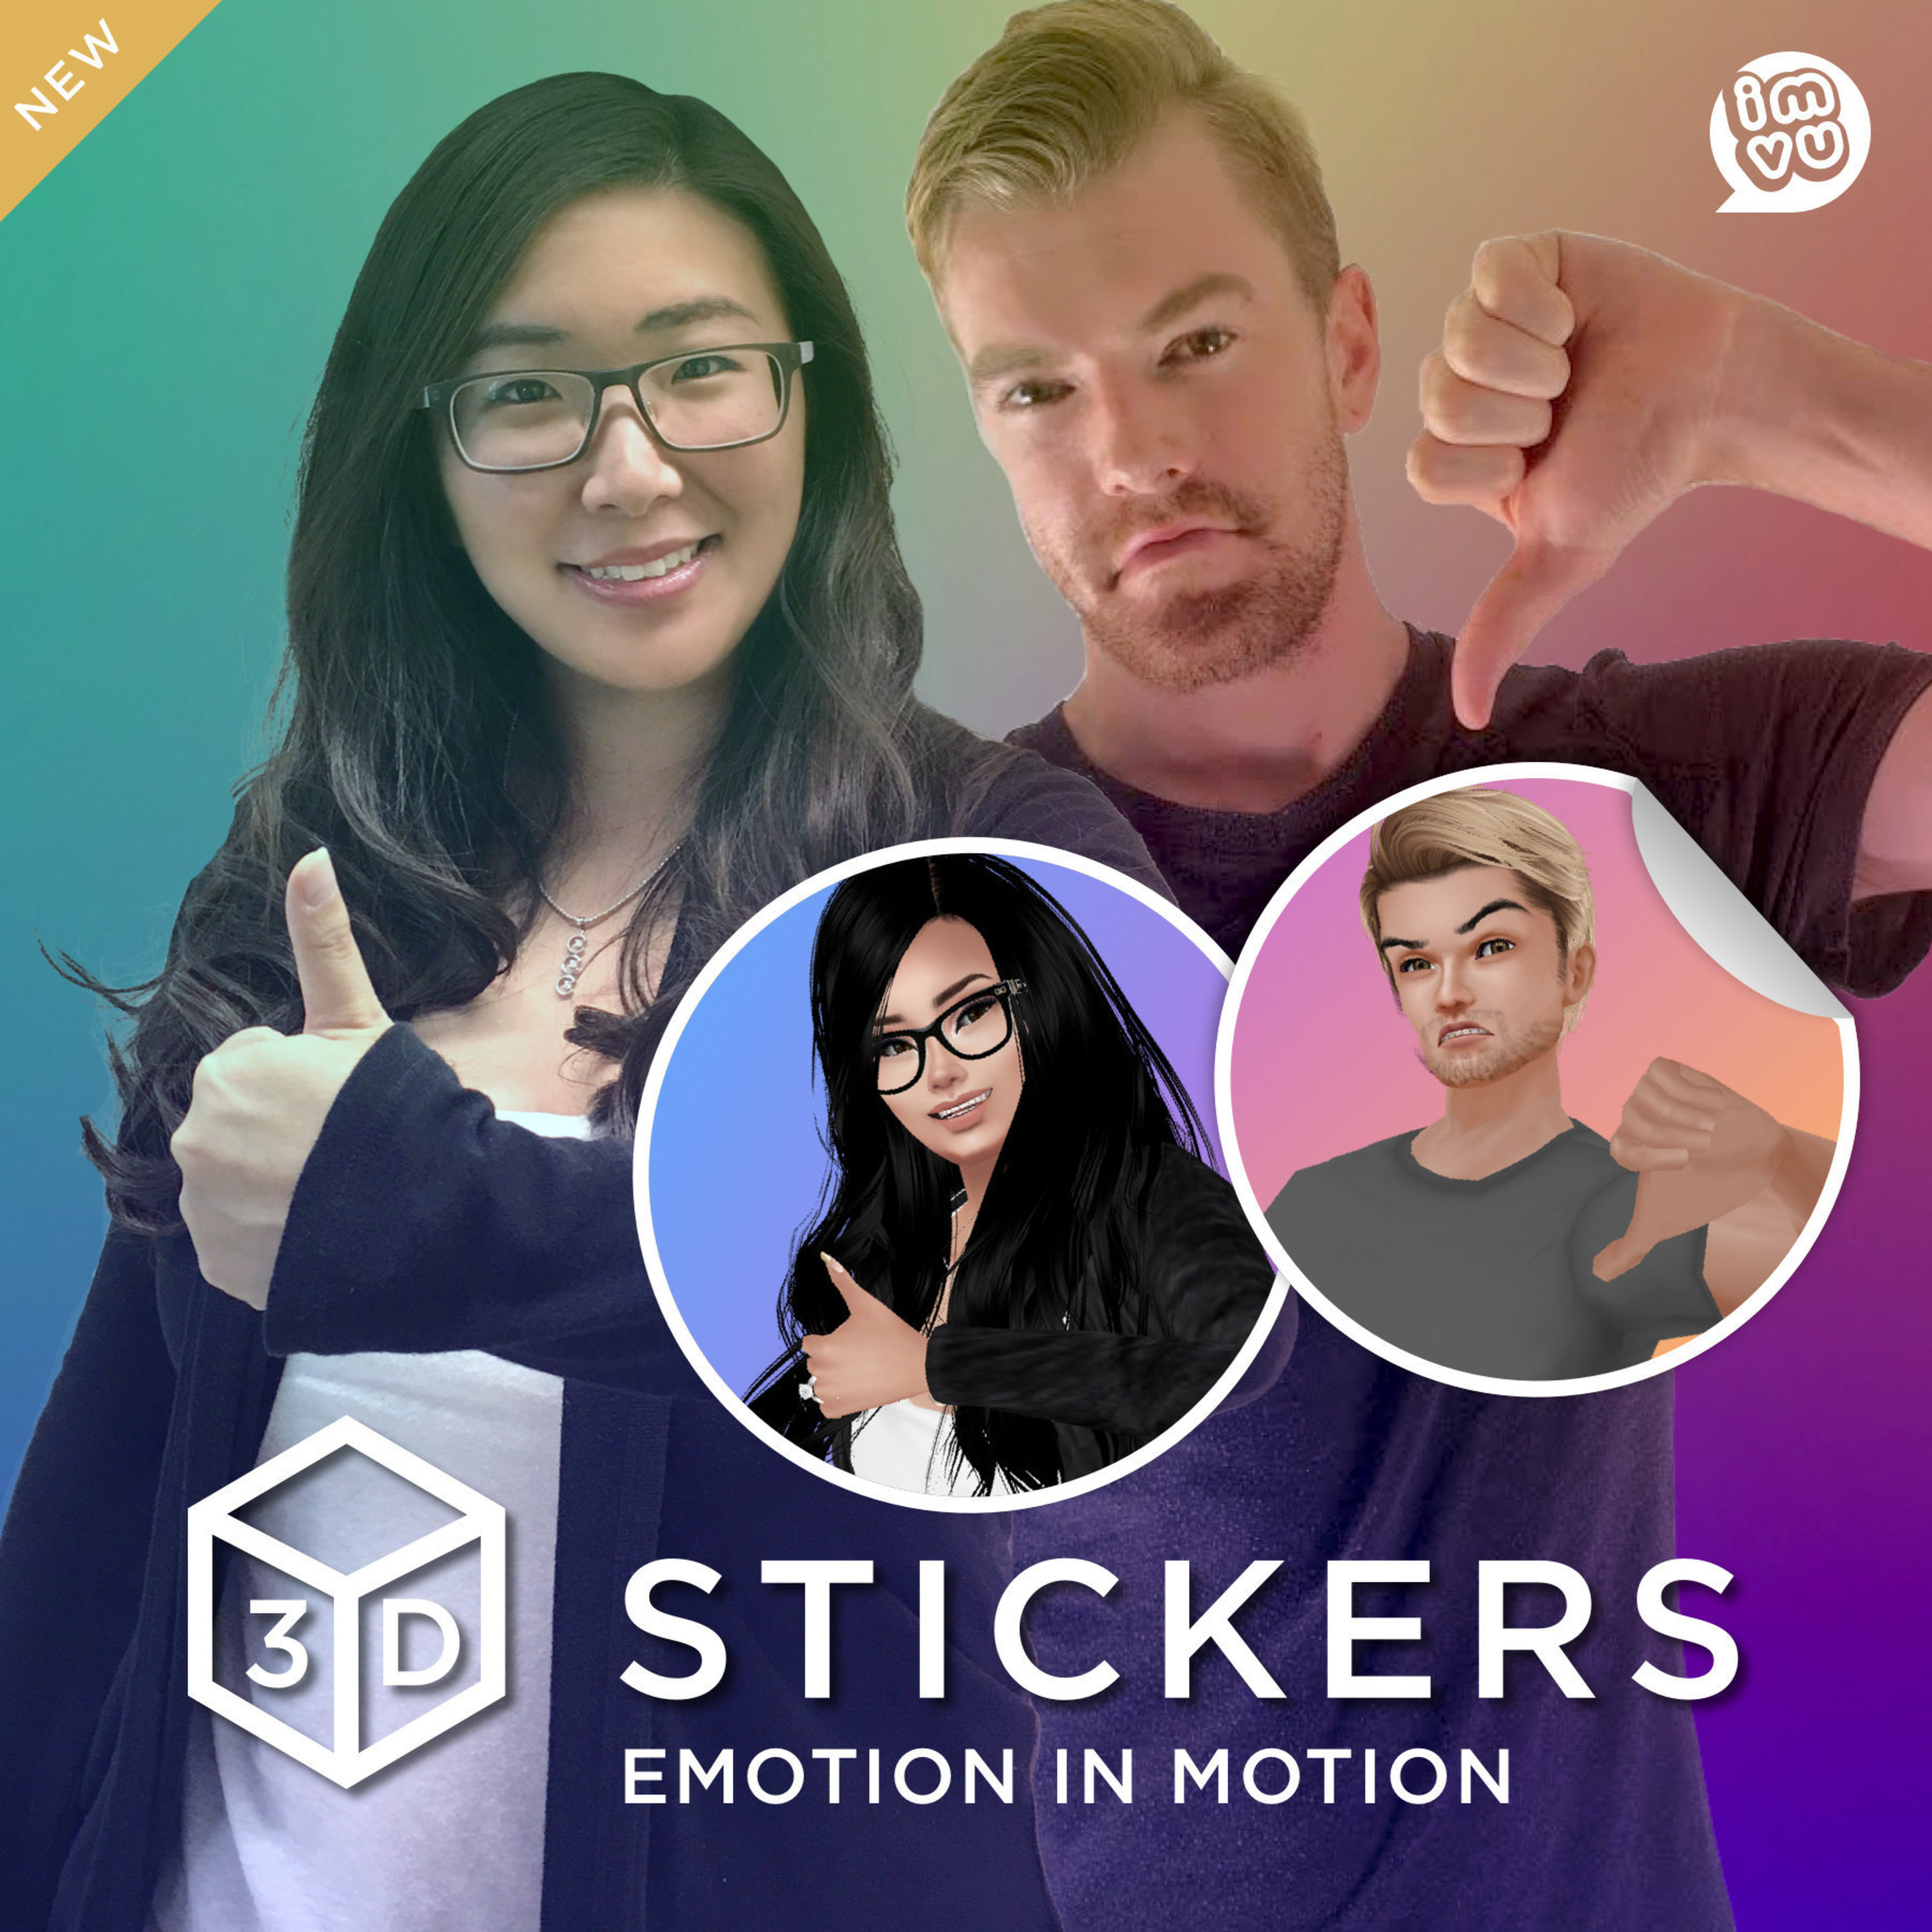 IMVU 3D Stickers use personalized avatars to bring your conversation to life.